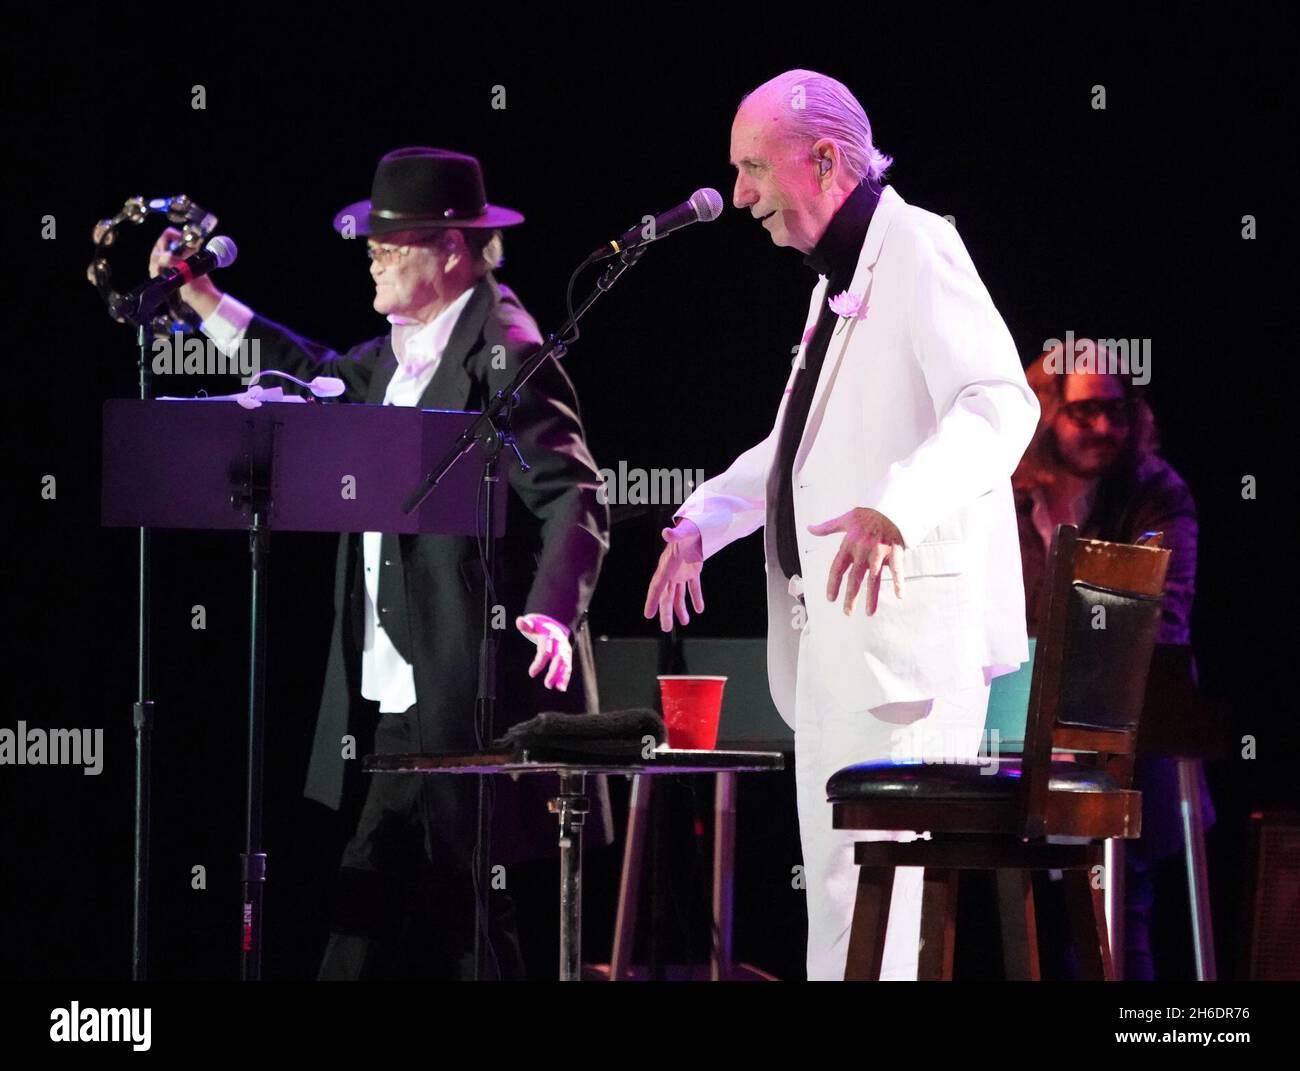 November 14, 2021, Los Angeles, California, USA: MICHAEL NESMITH and MICKY DOLENZ on stage together for the last time as they wrapped up the Monkees 2021 Farewell Tour at the Greek Theater, Los Angeles, CA, USA. The farewell tour will mark the end of a unique project that began in 1965 when four young men were cast in a television show about a struggling rock band that was inspired by the Beatles 'A Hard Day's Night.'Formed in Los Angeles for the eponymous television series, the quartet of Dolenz, Nesmith, the late Peter Tork and the late Davy Jones brought a singular mix of pop, rock, psyched Stock Photo